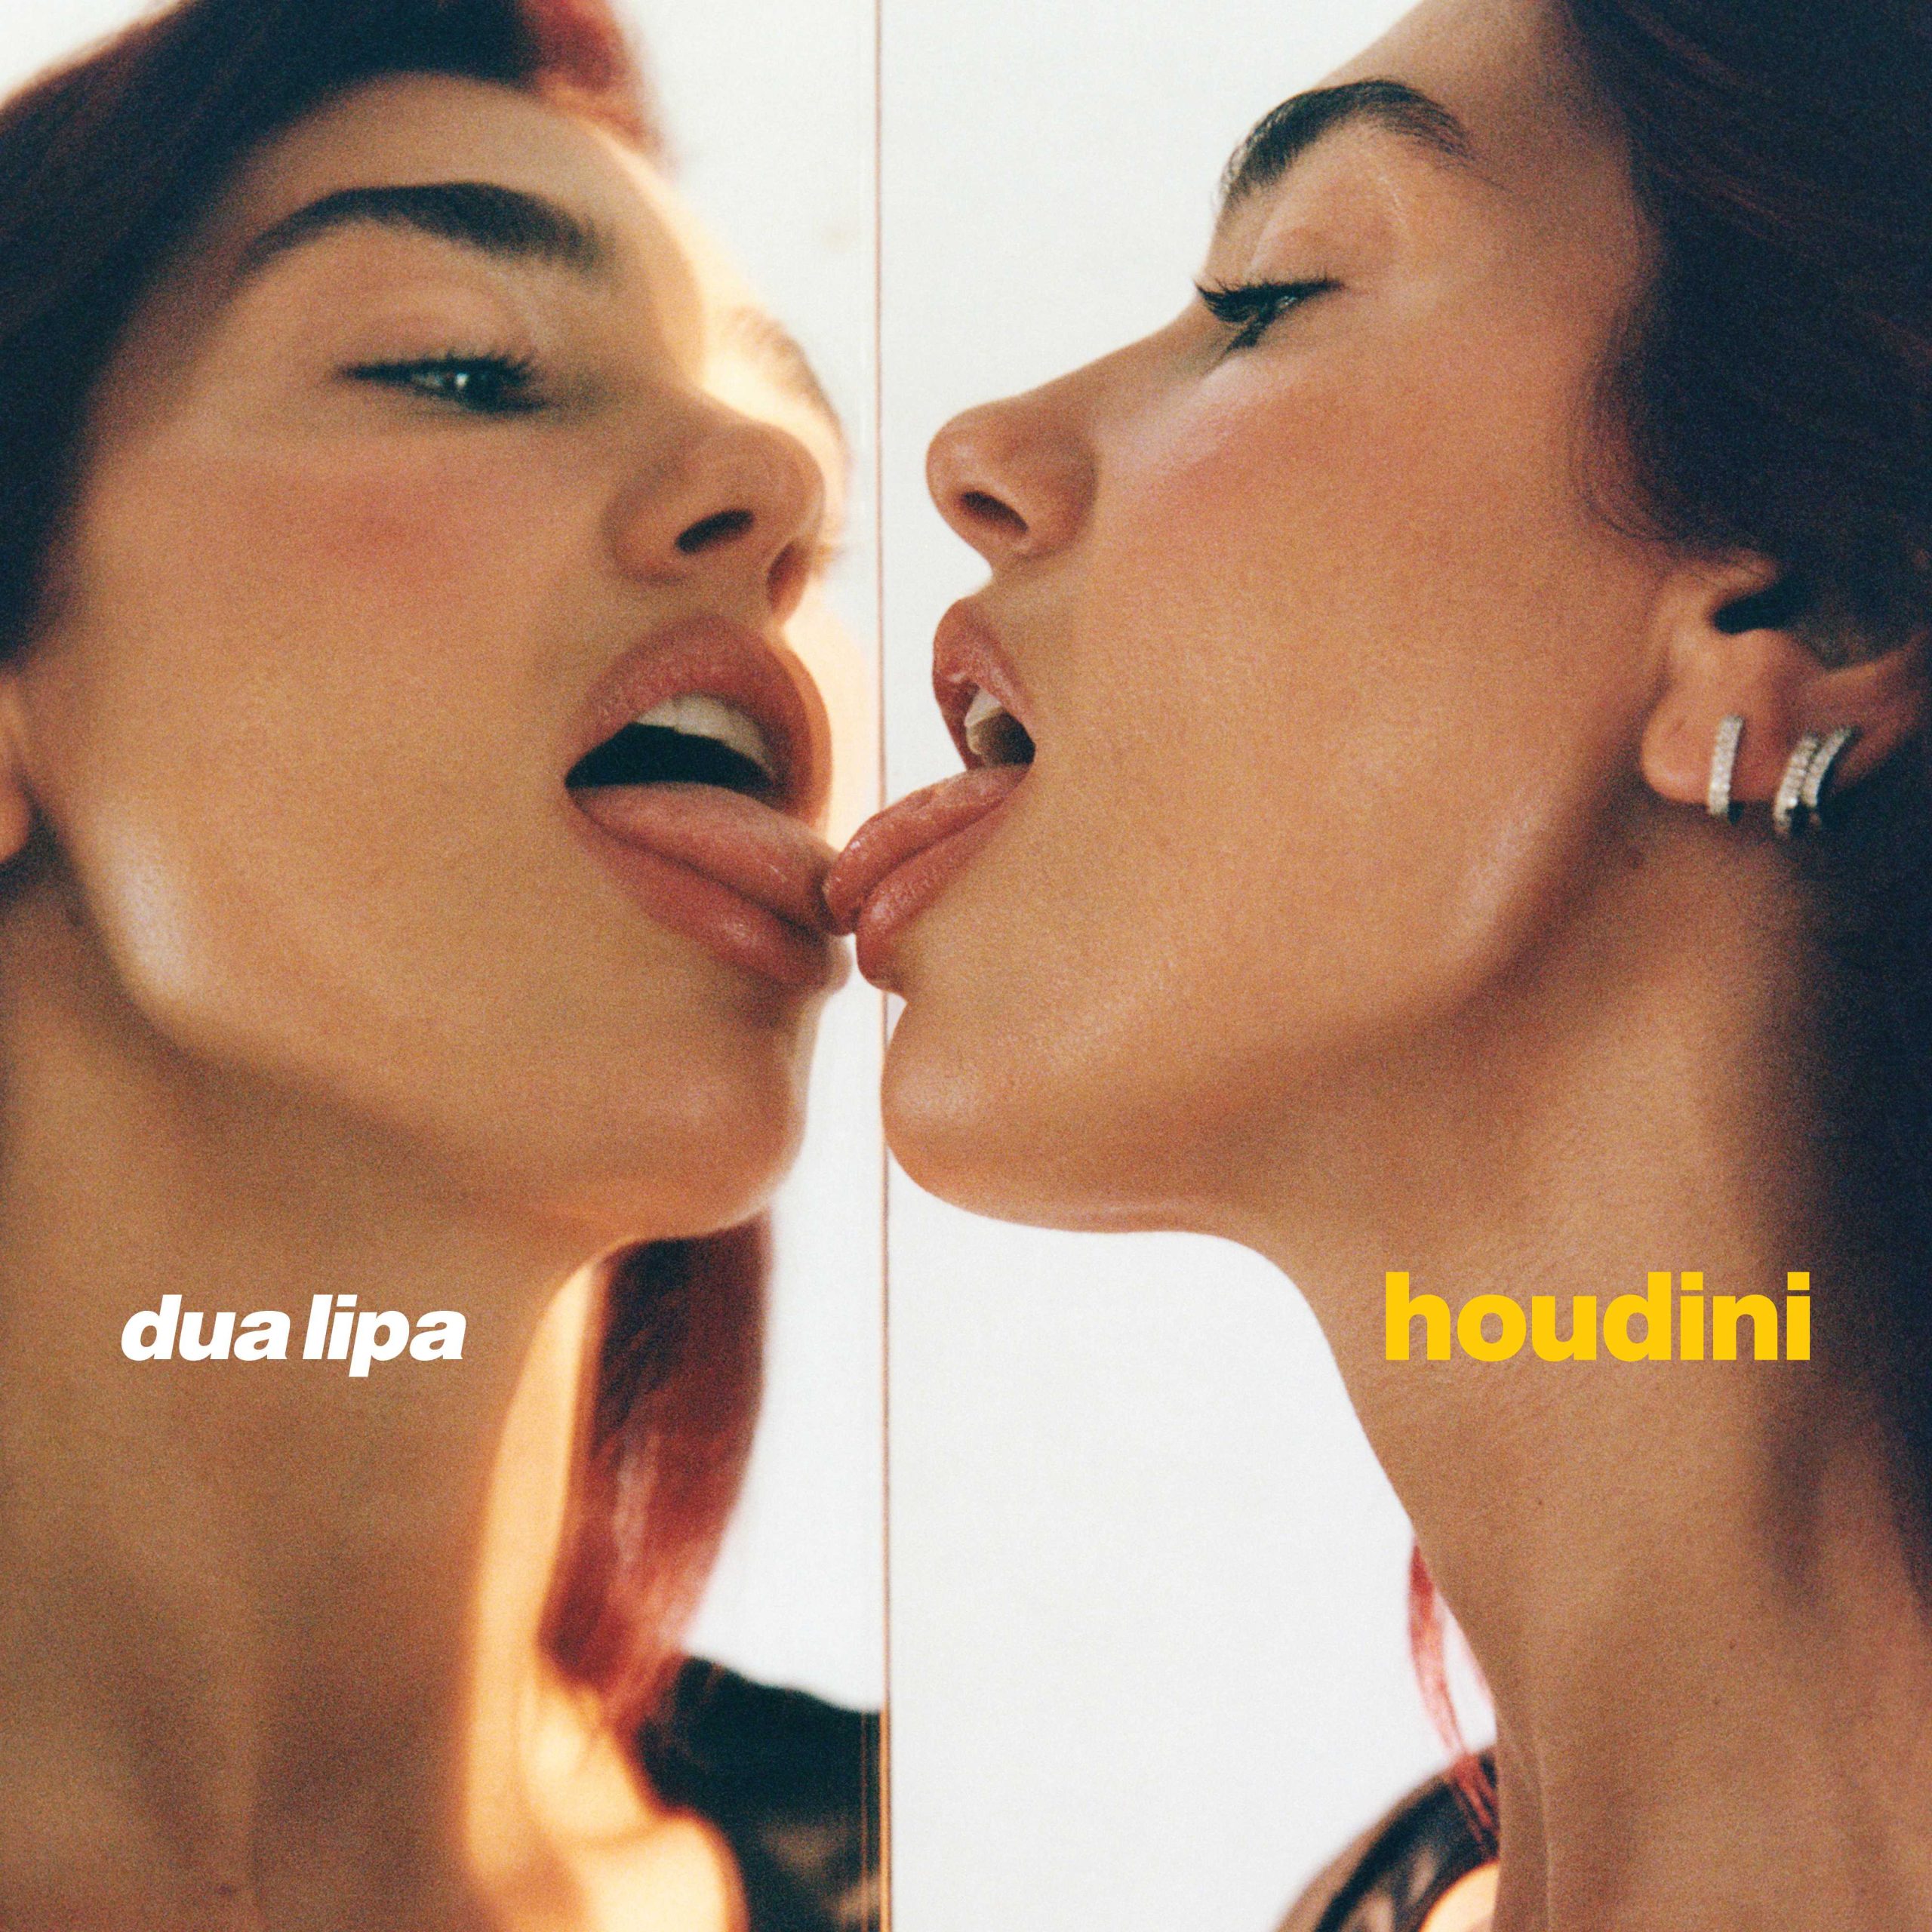 GLOBAL POP SUPERSTAR DUA LIPA RELEASES NEW SINGLE AND NEW VIDEO  “HOUDINI” OUT NOW